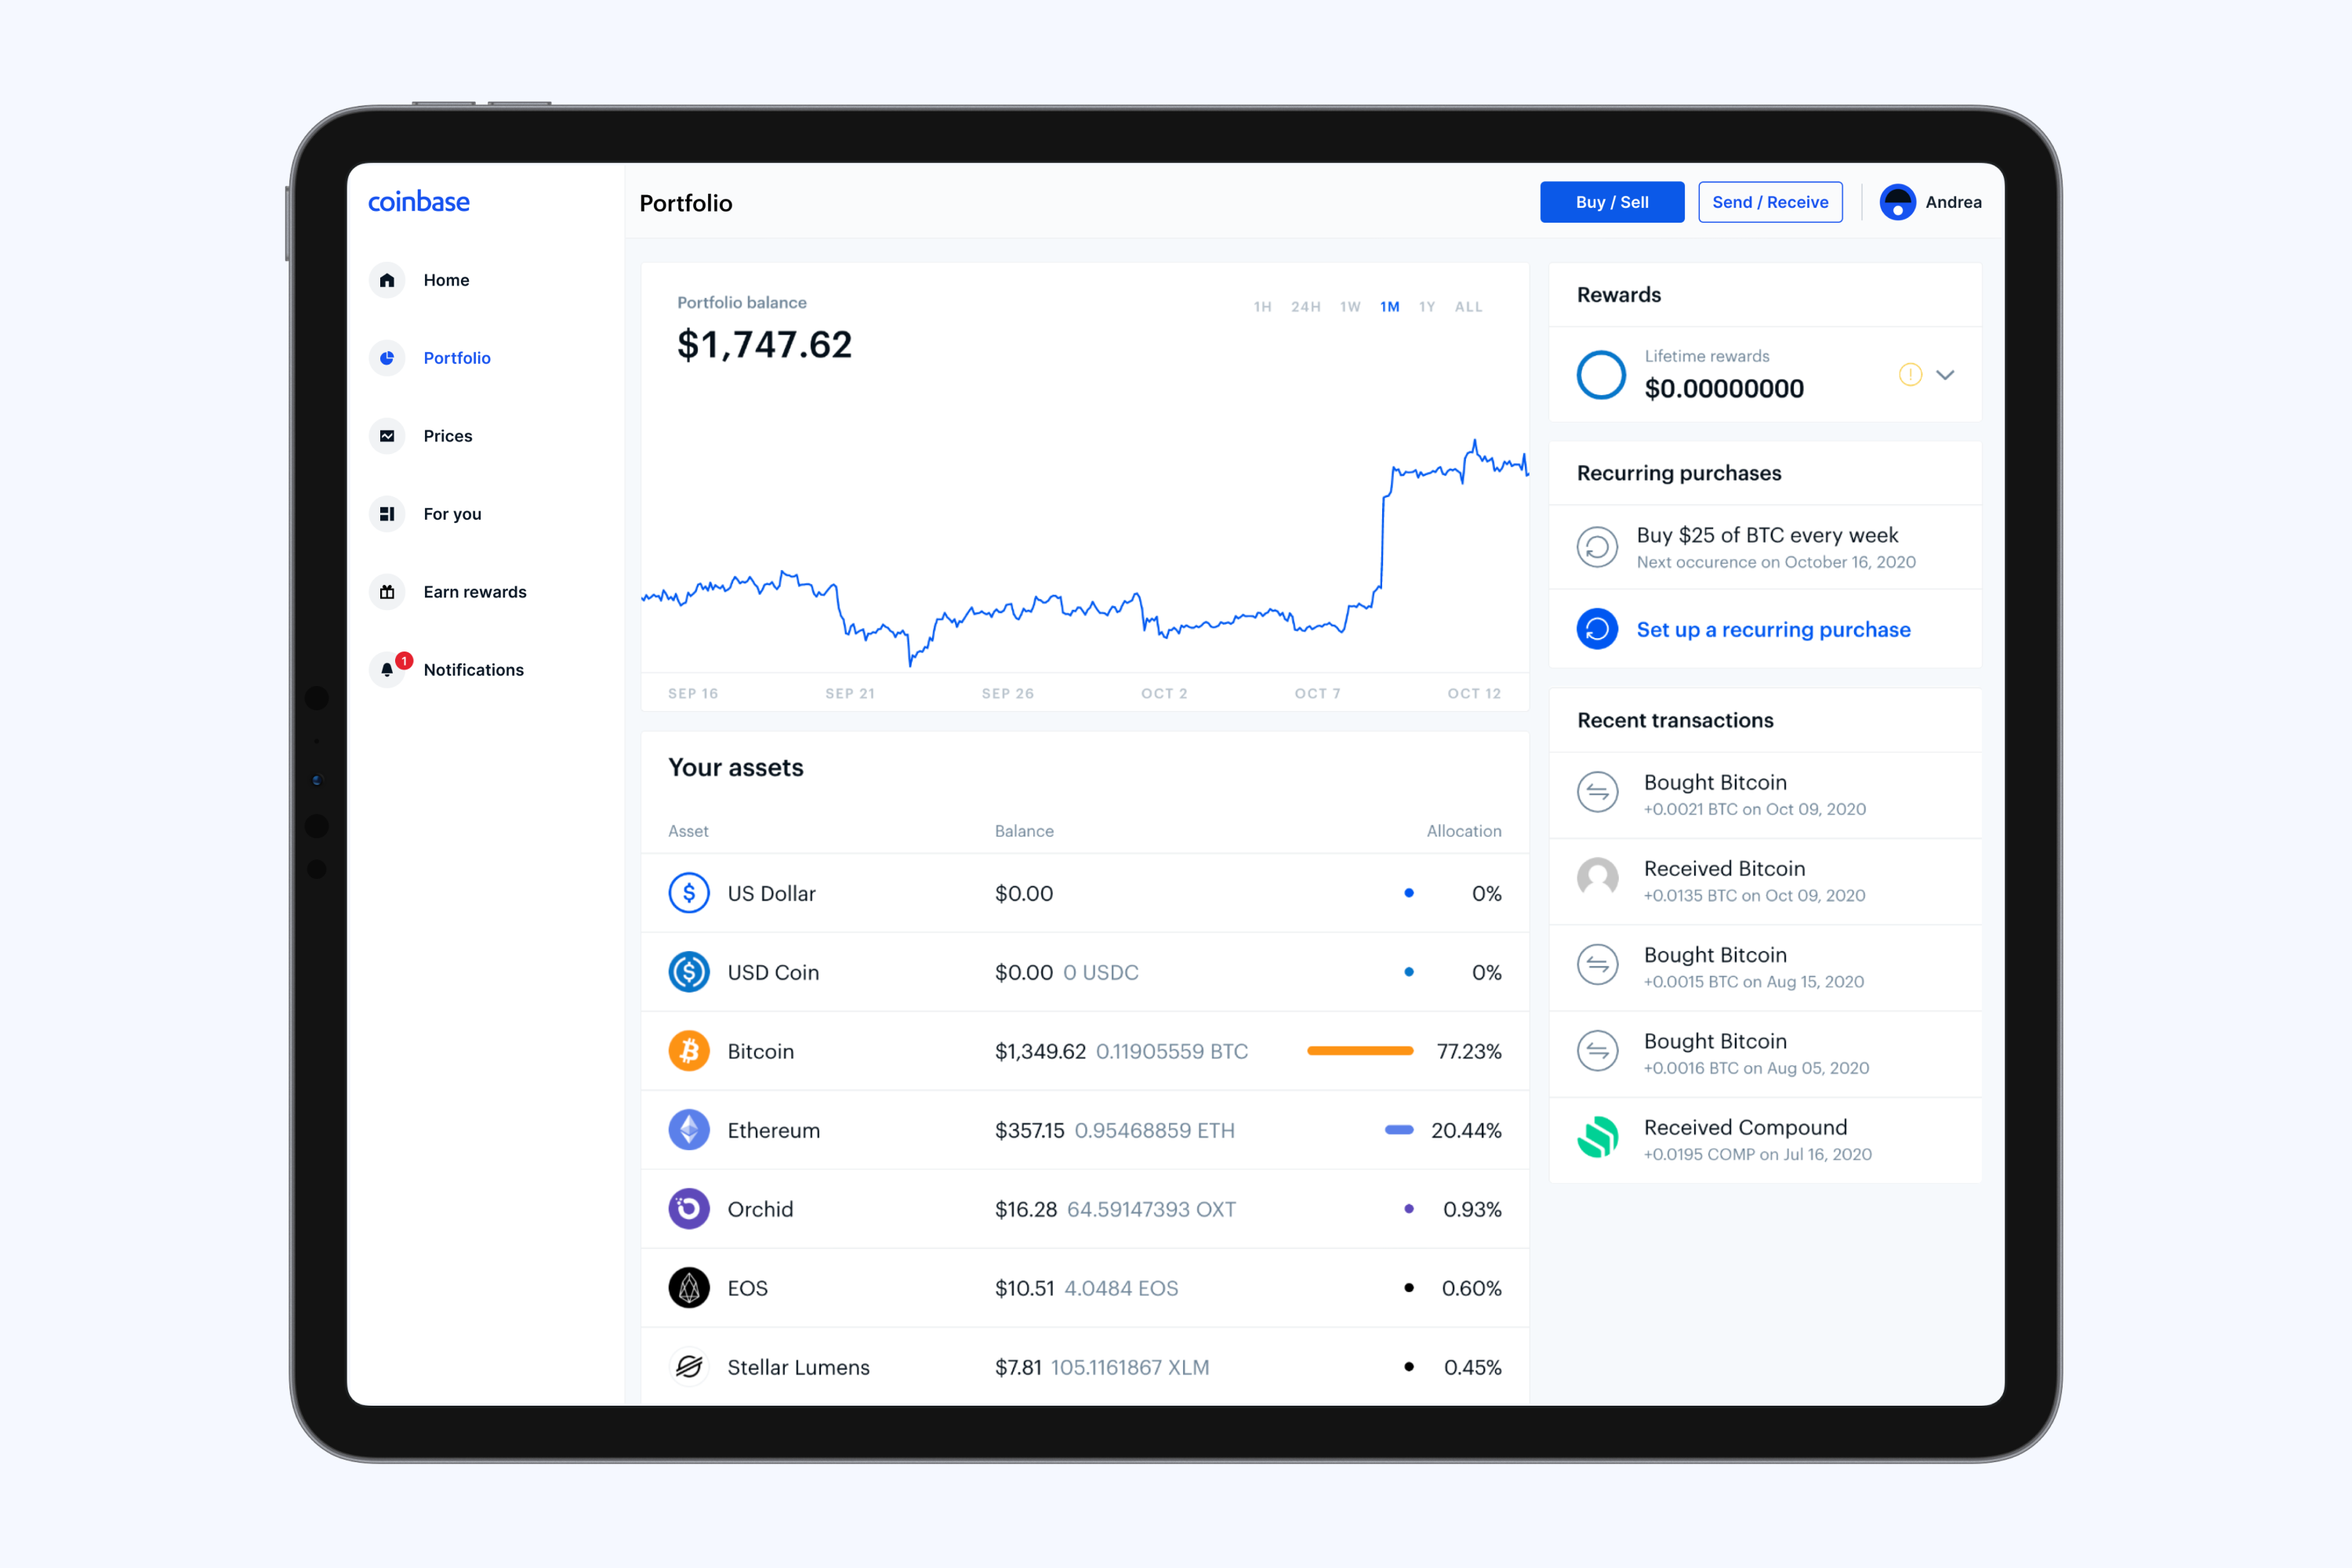 Coinbase addresses rumors of $5, withdrawal limit